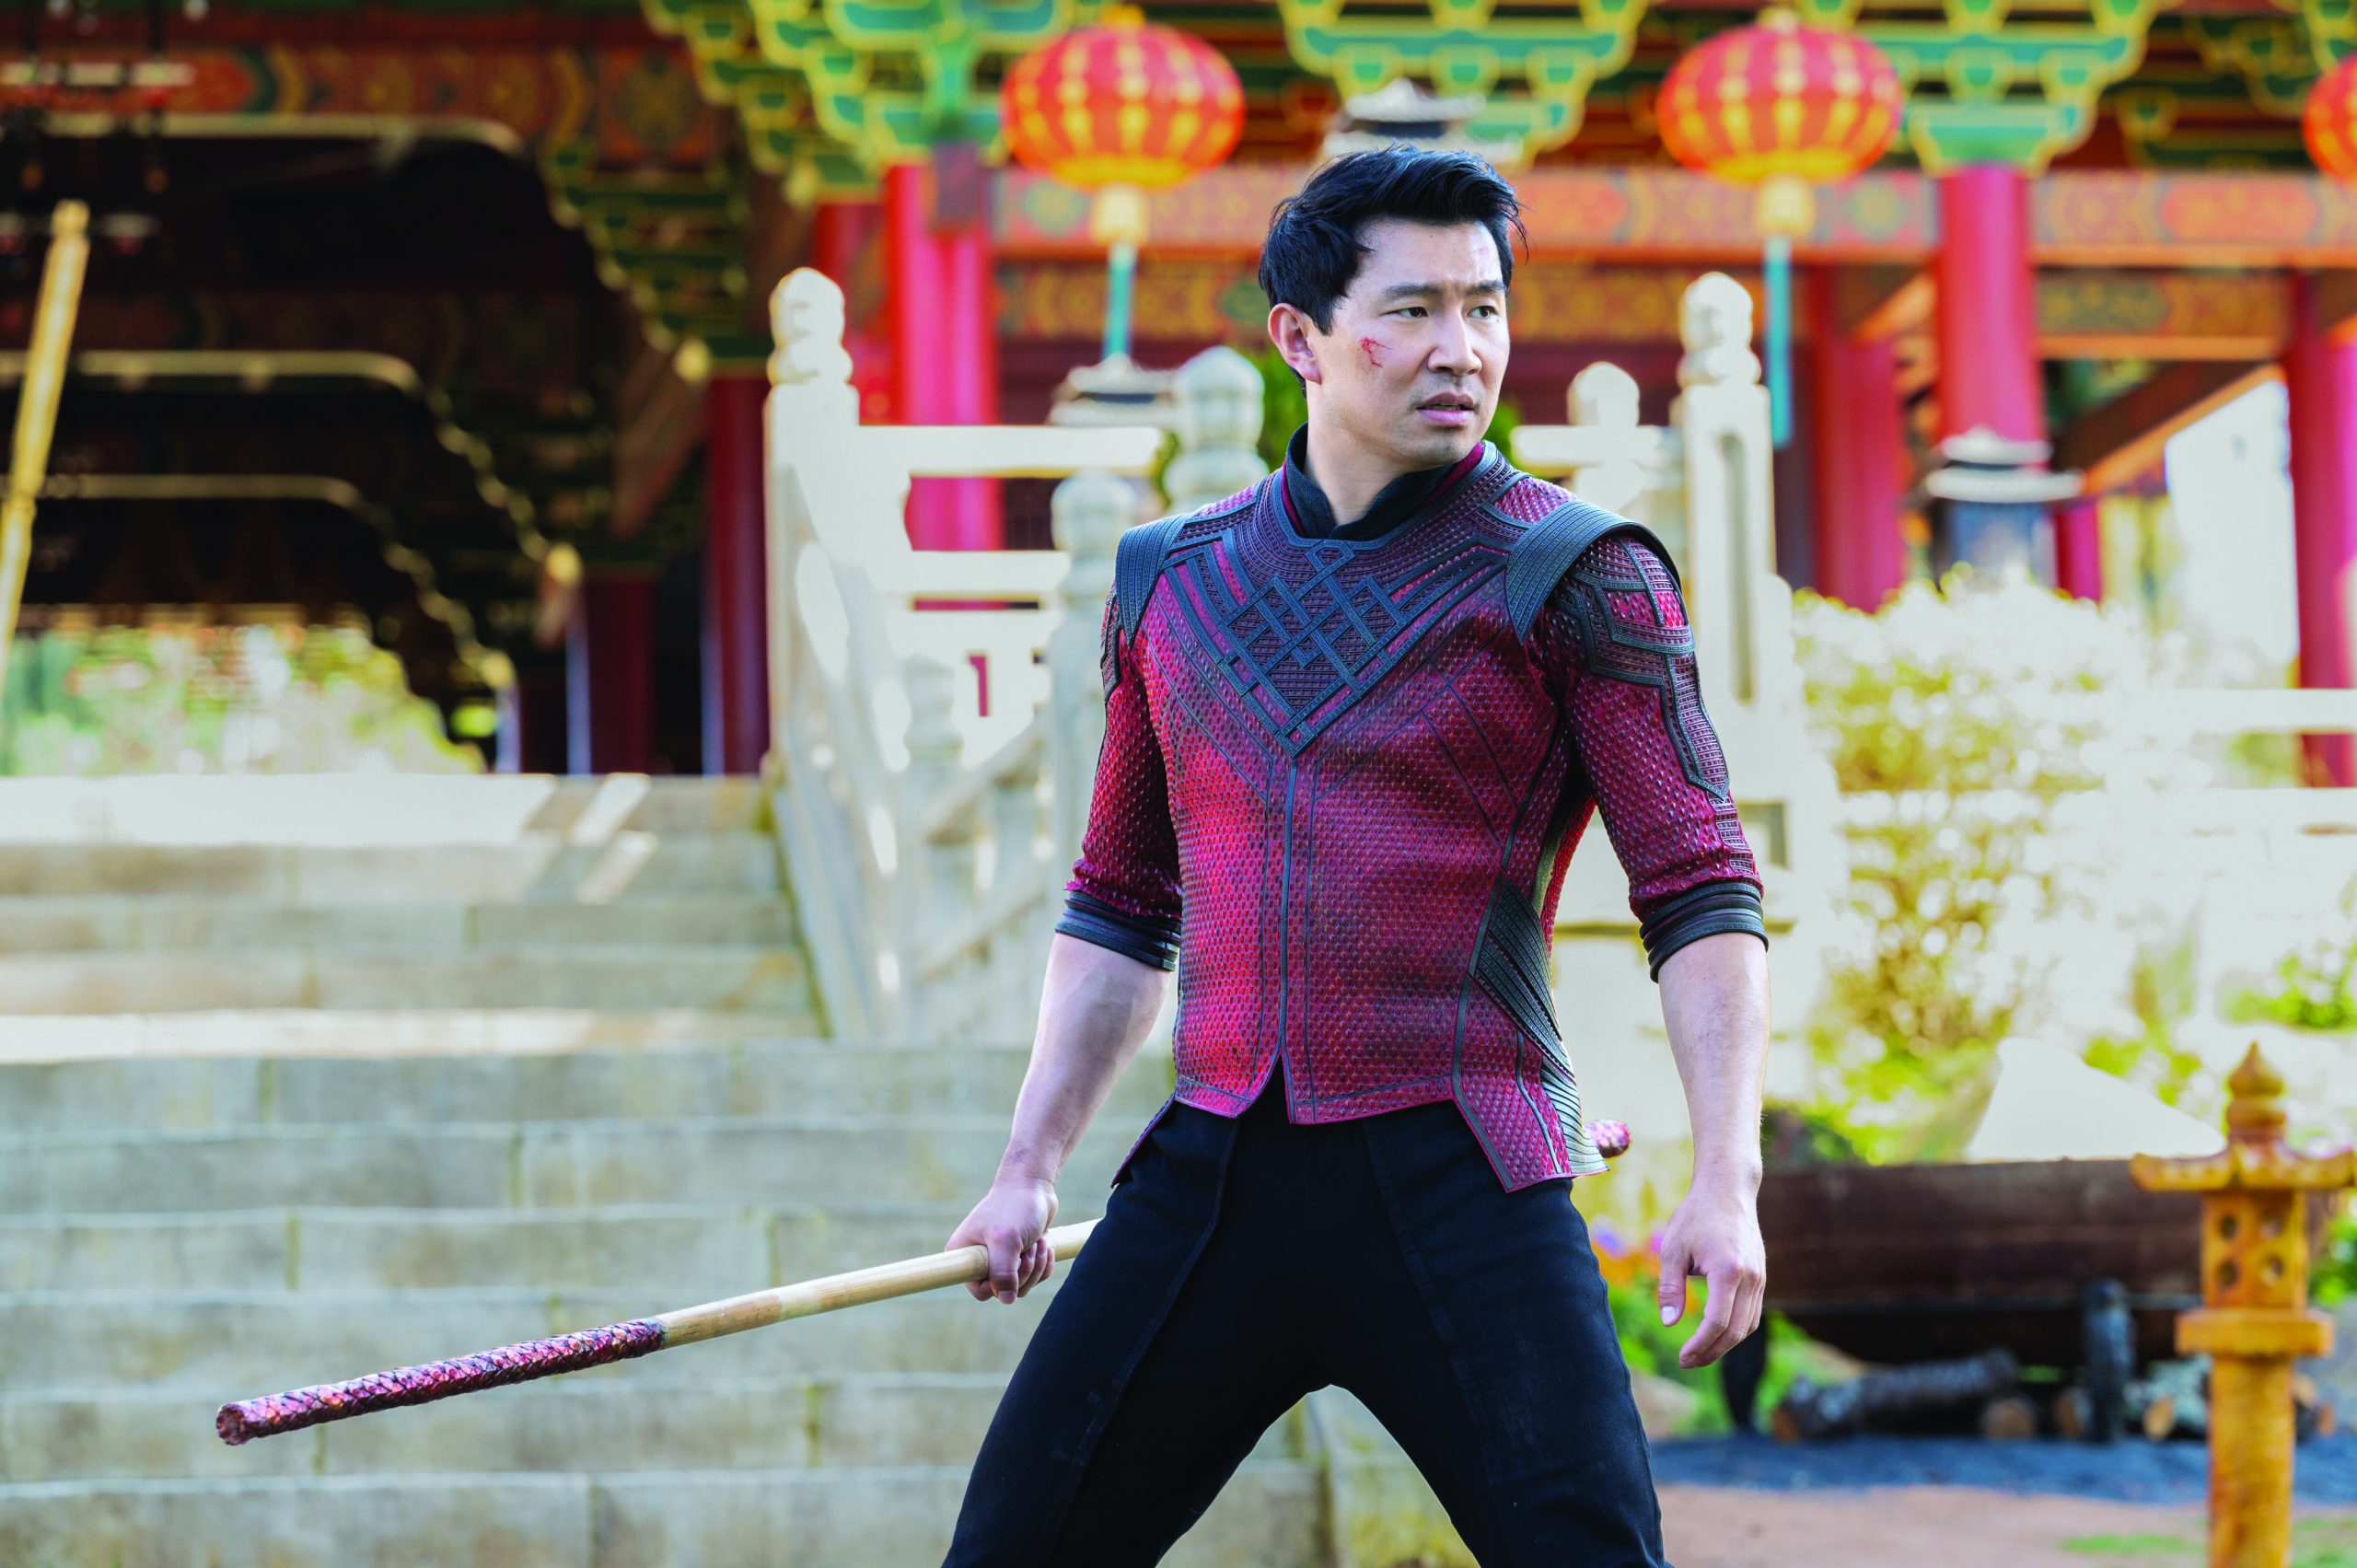 ‘Shang-Chi’ proves legendary, for many reasons